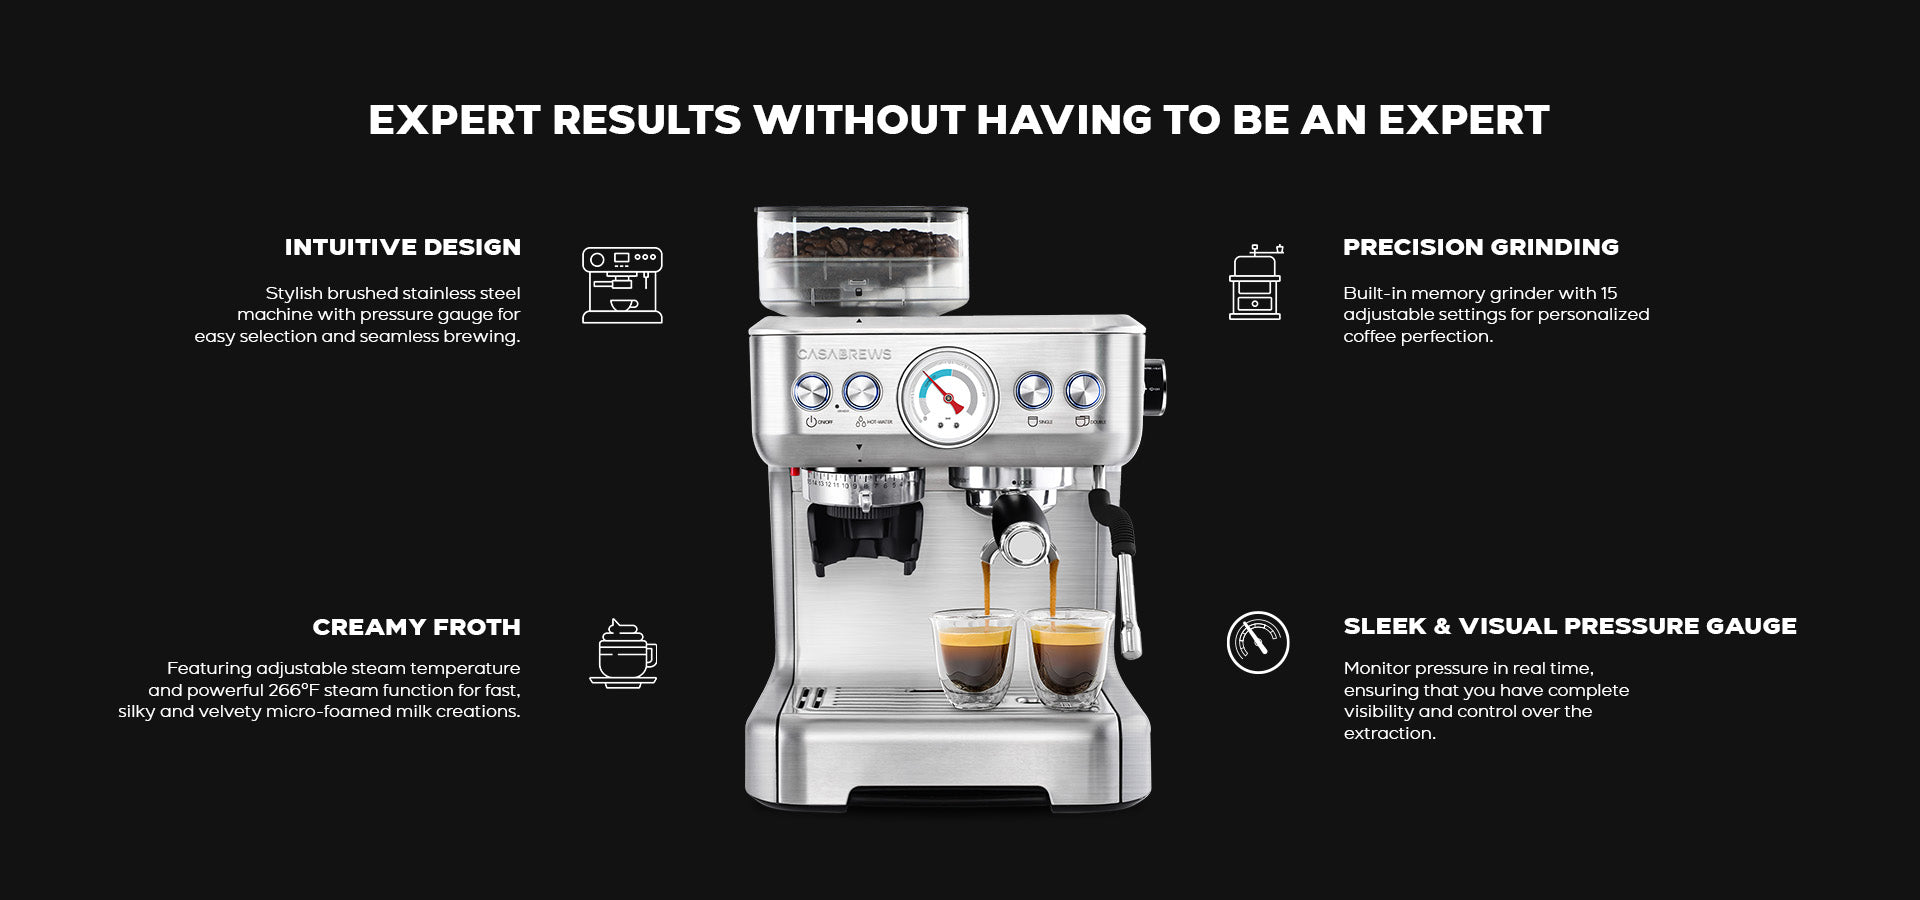 CASABREWS 5700GENSE™ All-in-One Espresso Machine with Auto Grinding